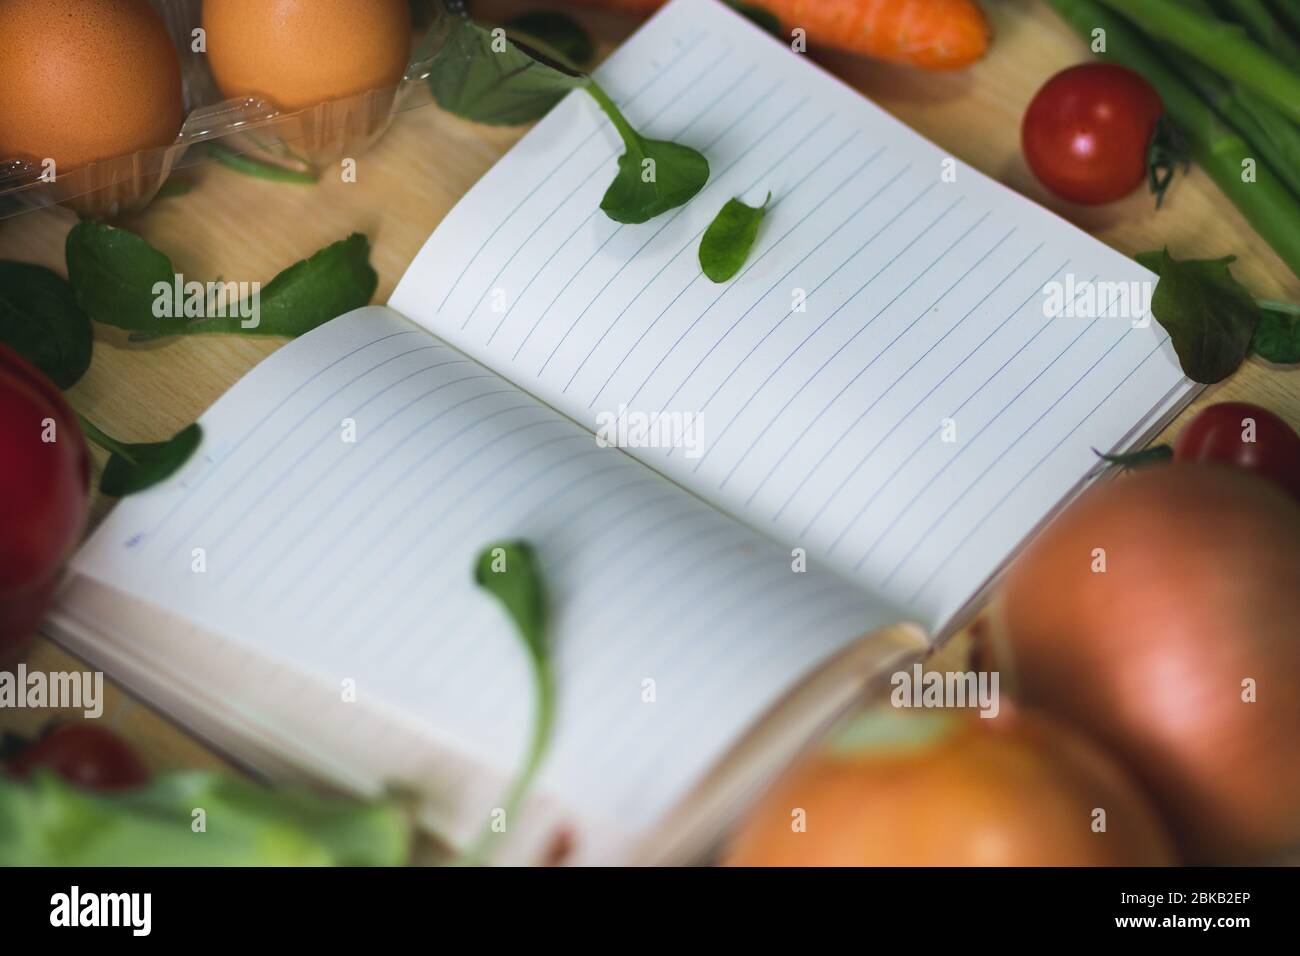 Open notebook surrounded by vegetables. Grocery list with vegetables around it. Shopping list with vegetables surrounding it. shopping for groceries Stock Photo